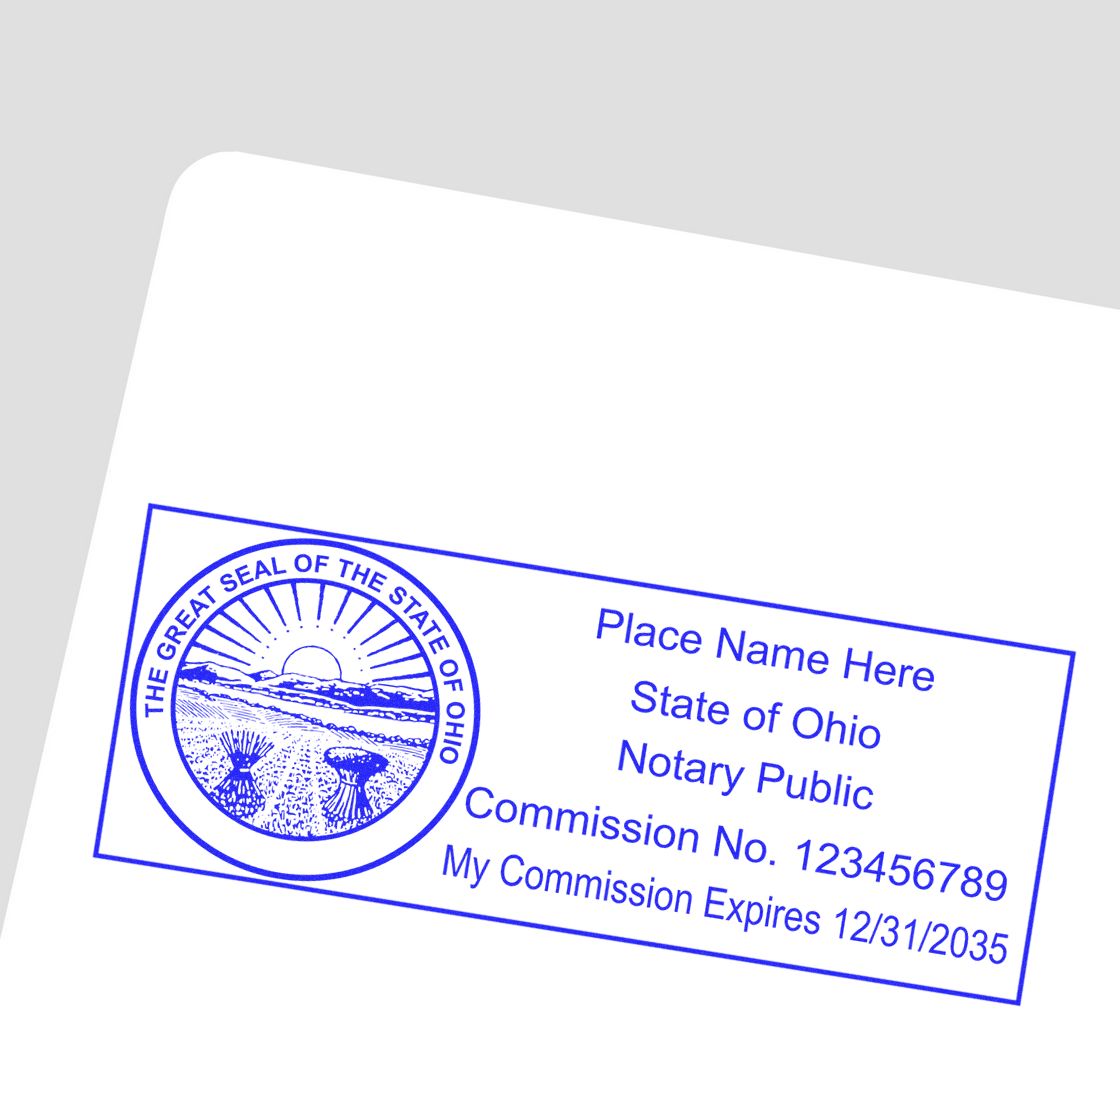 This paper is stamped with a sample imprint of the Wooden Handle Ohio State Seal Notary Public Stamp, signifying its quality and reliability.